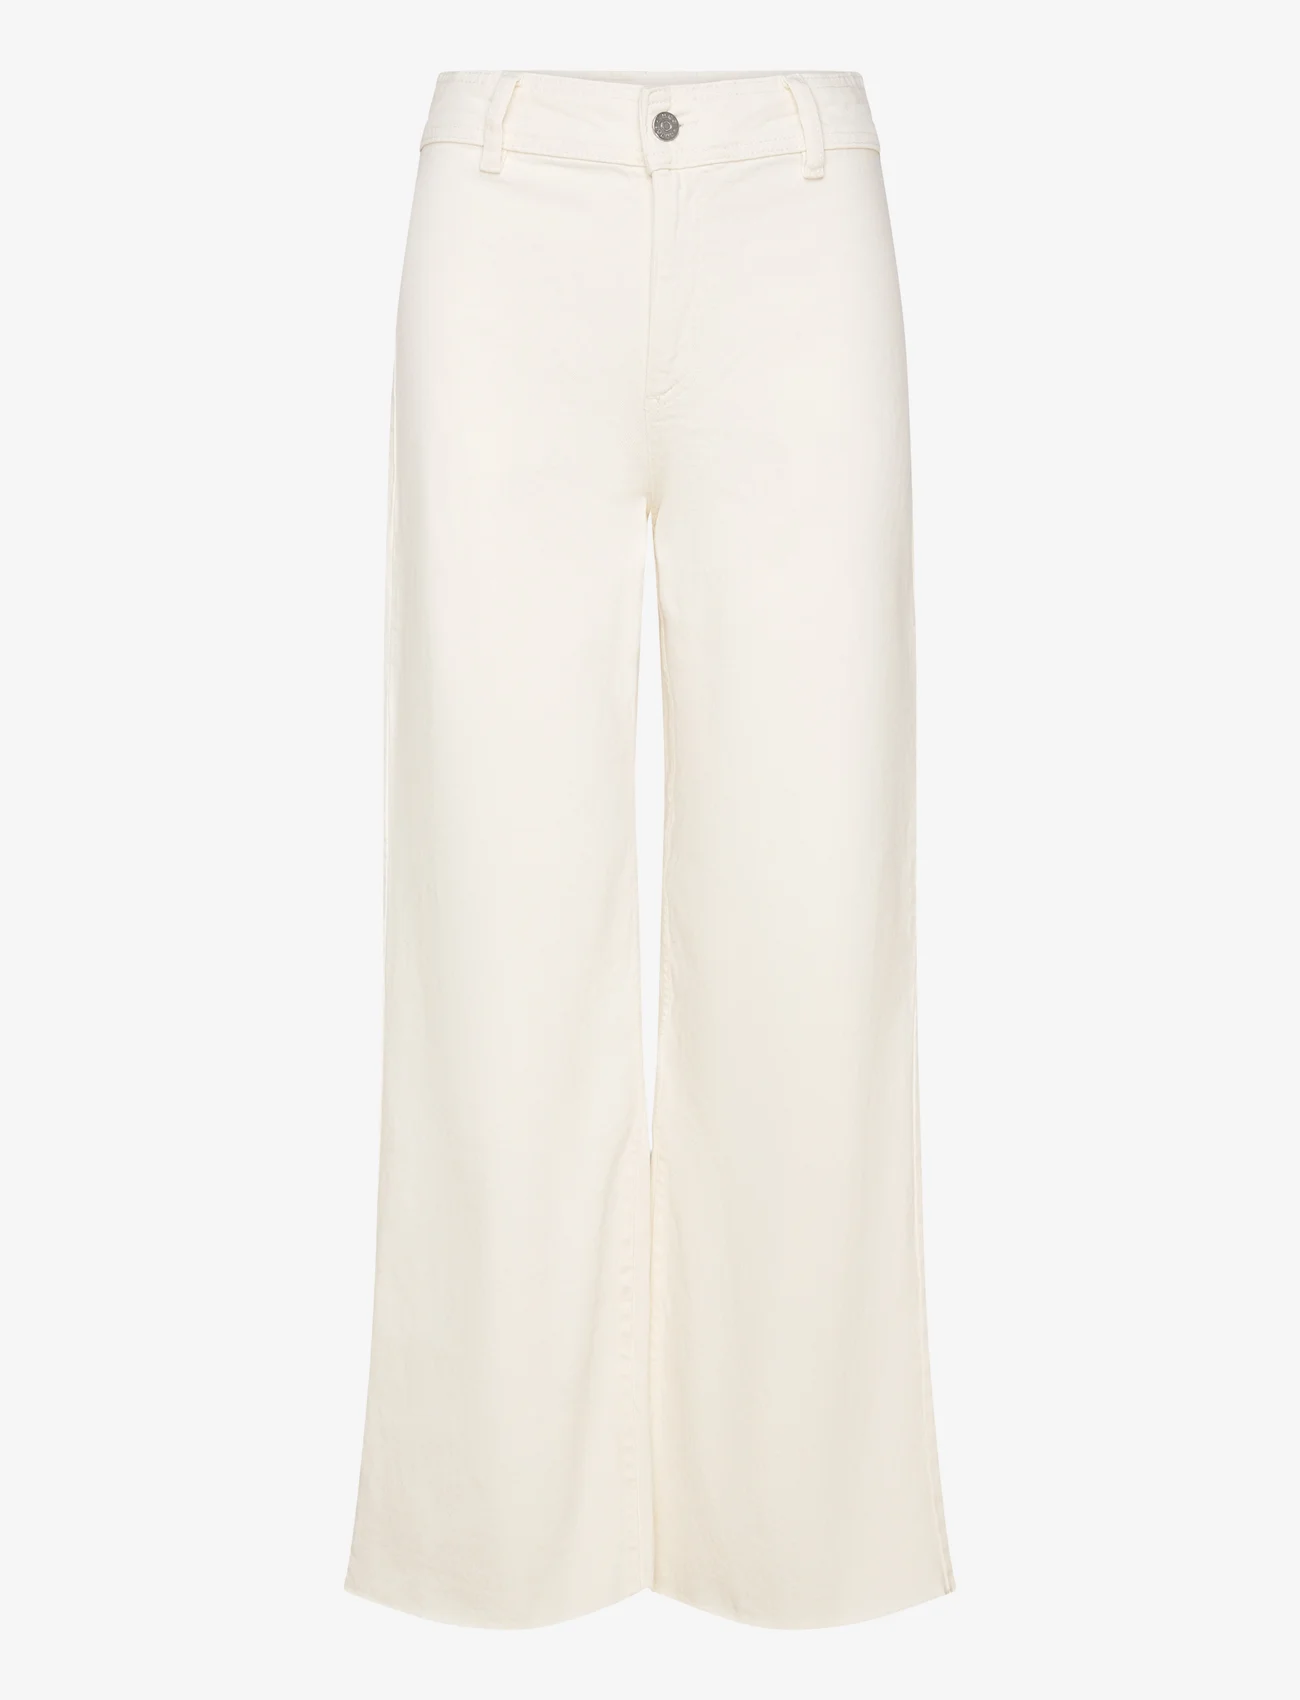 Mango - Jeans culotte high waist - flared jeans - natural white - 1